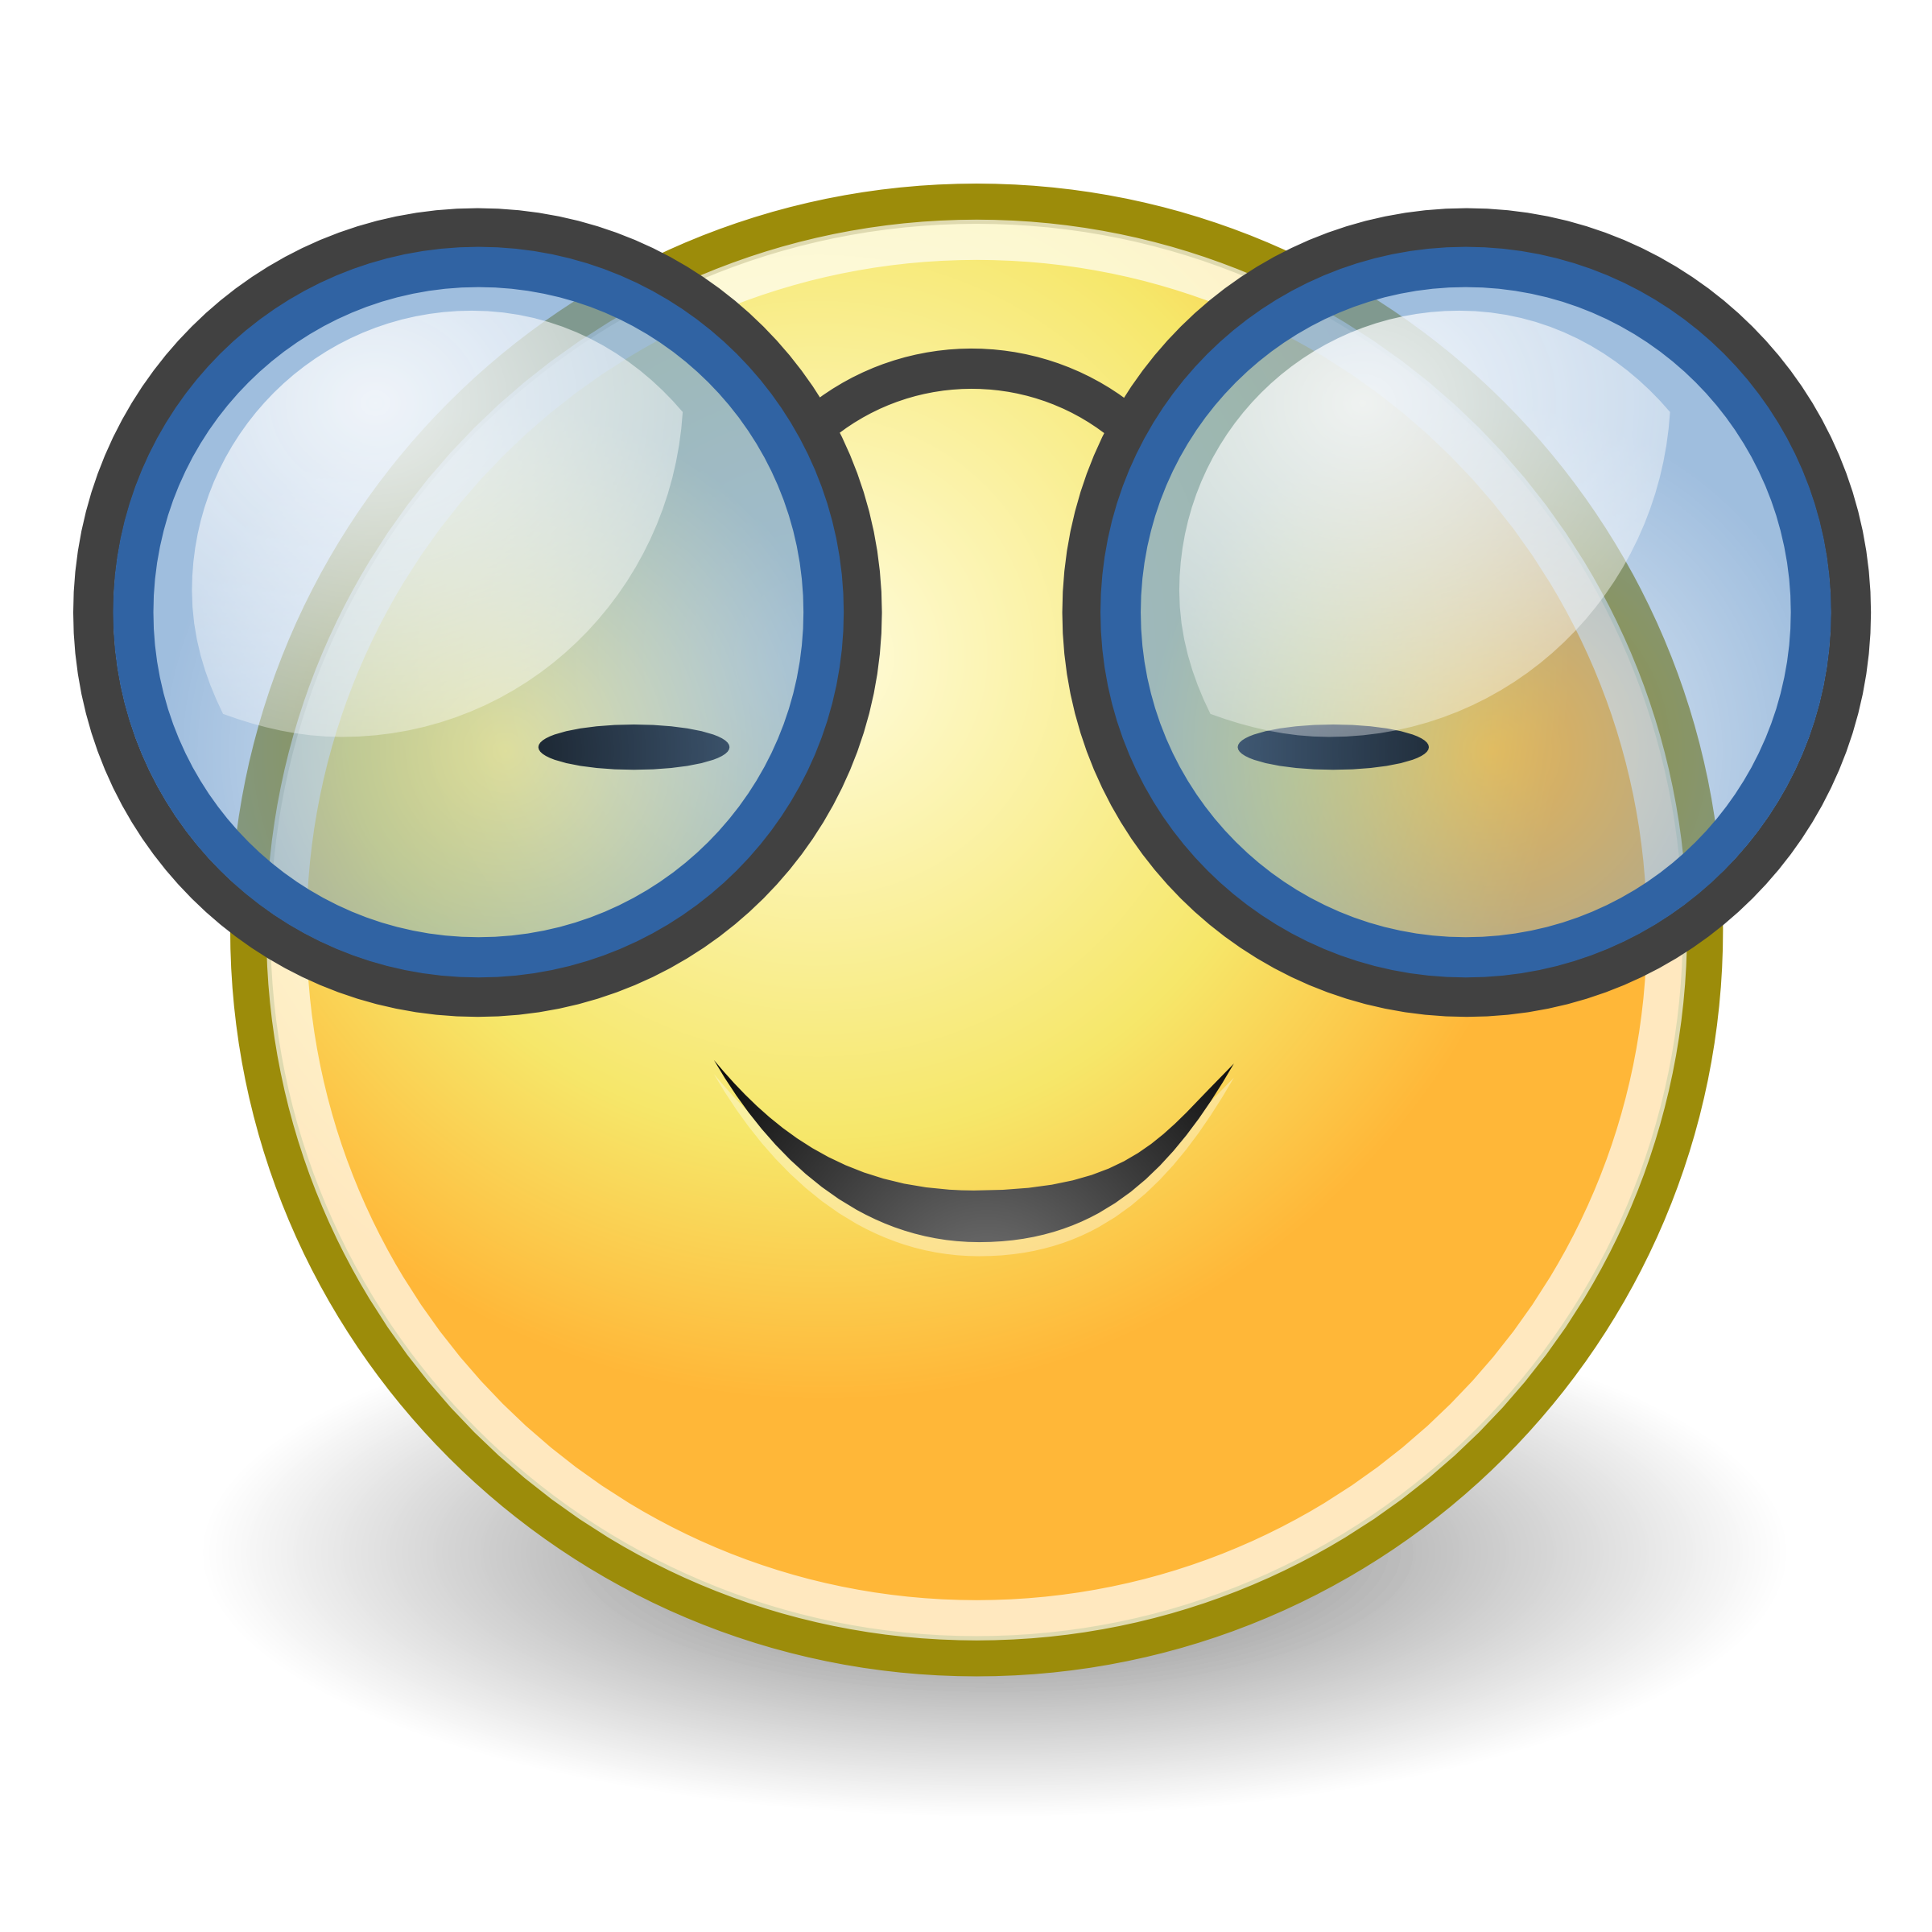 Smiley Face with Glasses